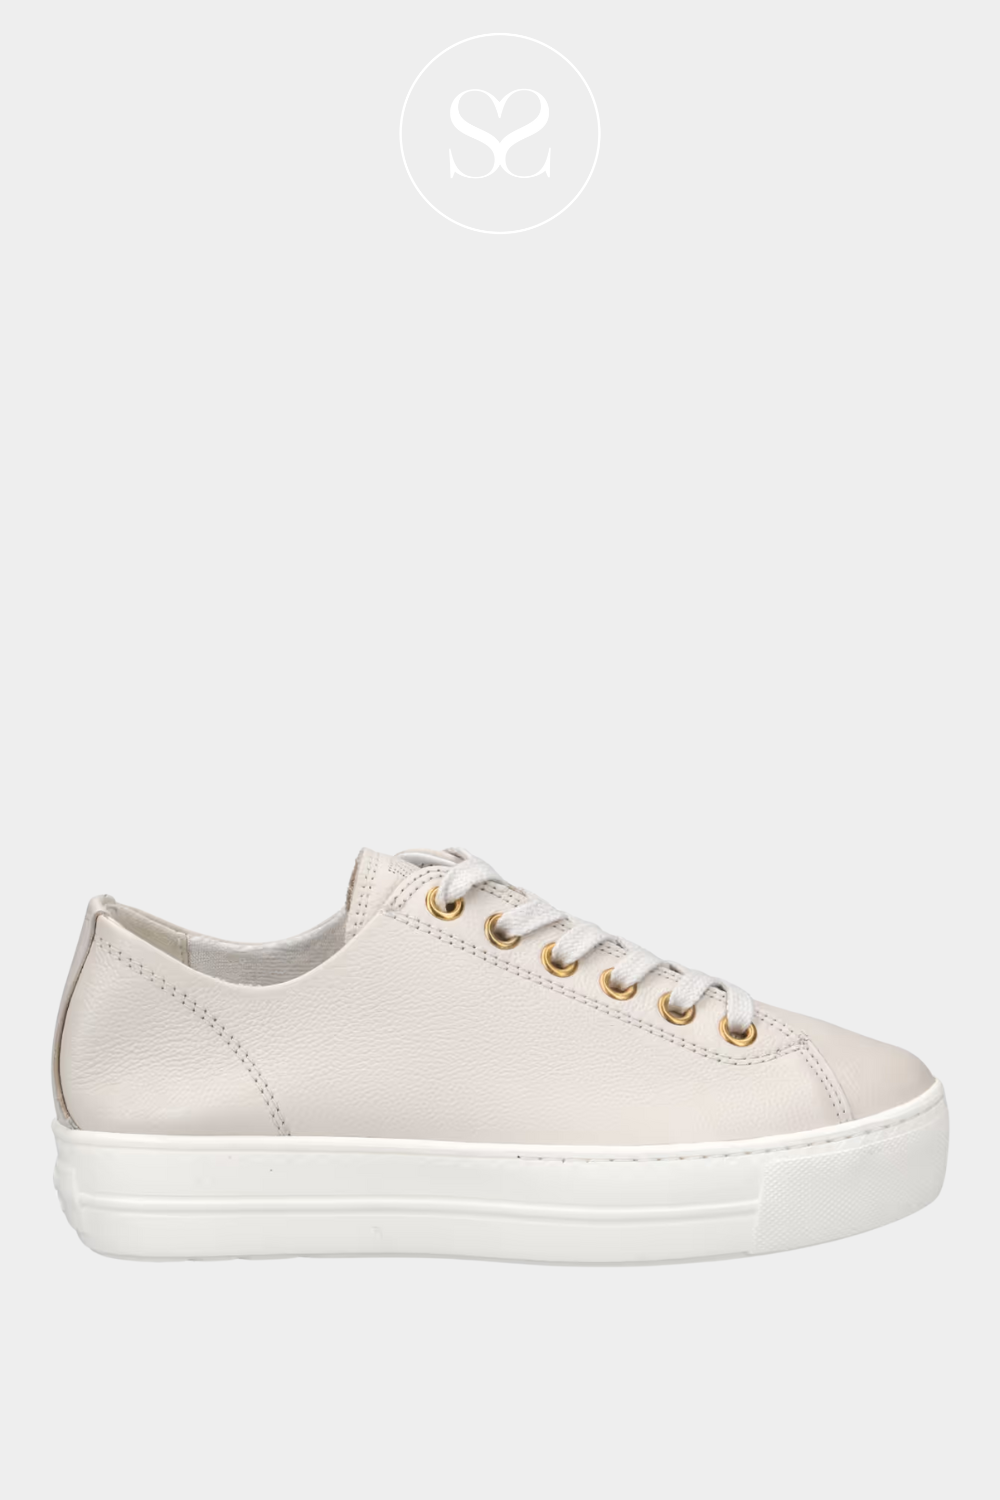 PAUL GREEN 4790 CREAM FLATFORM LACED TRAINERS WITH GOLD EYELETS